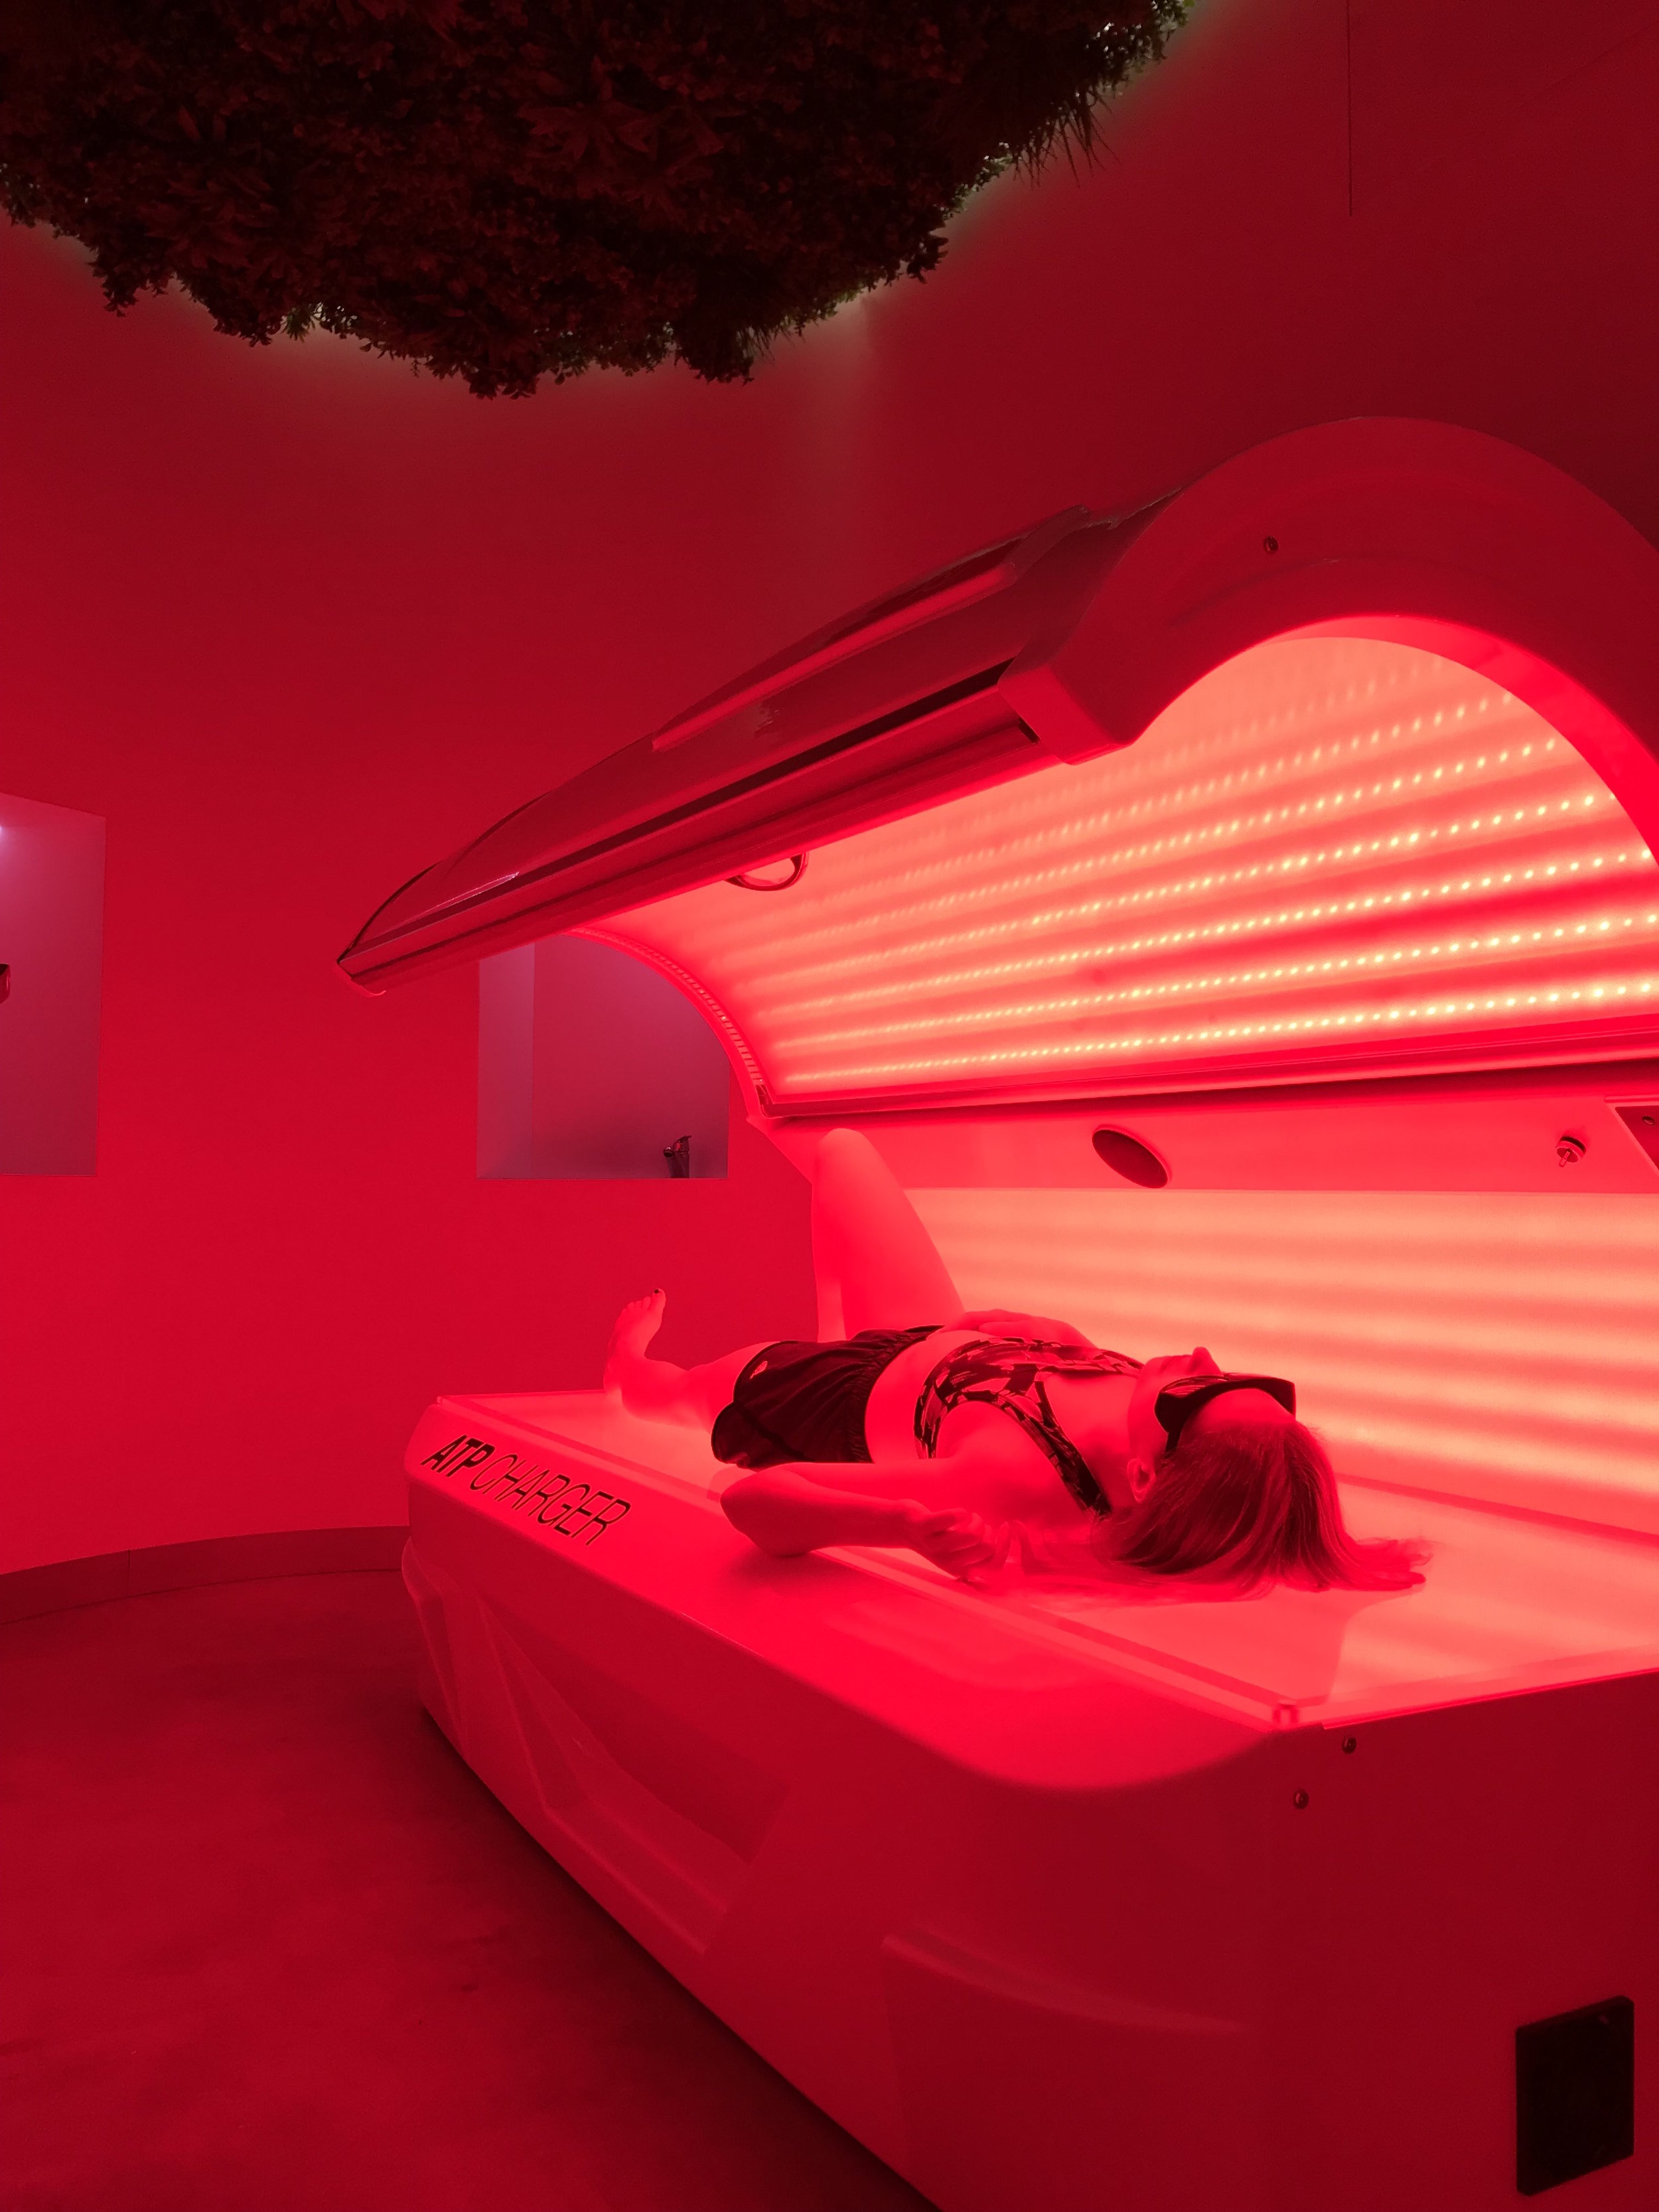 What Is Red Light Therapy At Planet Fitness